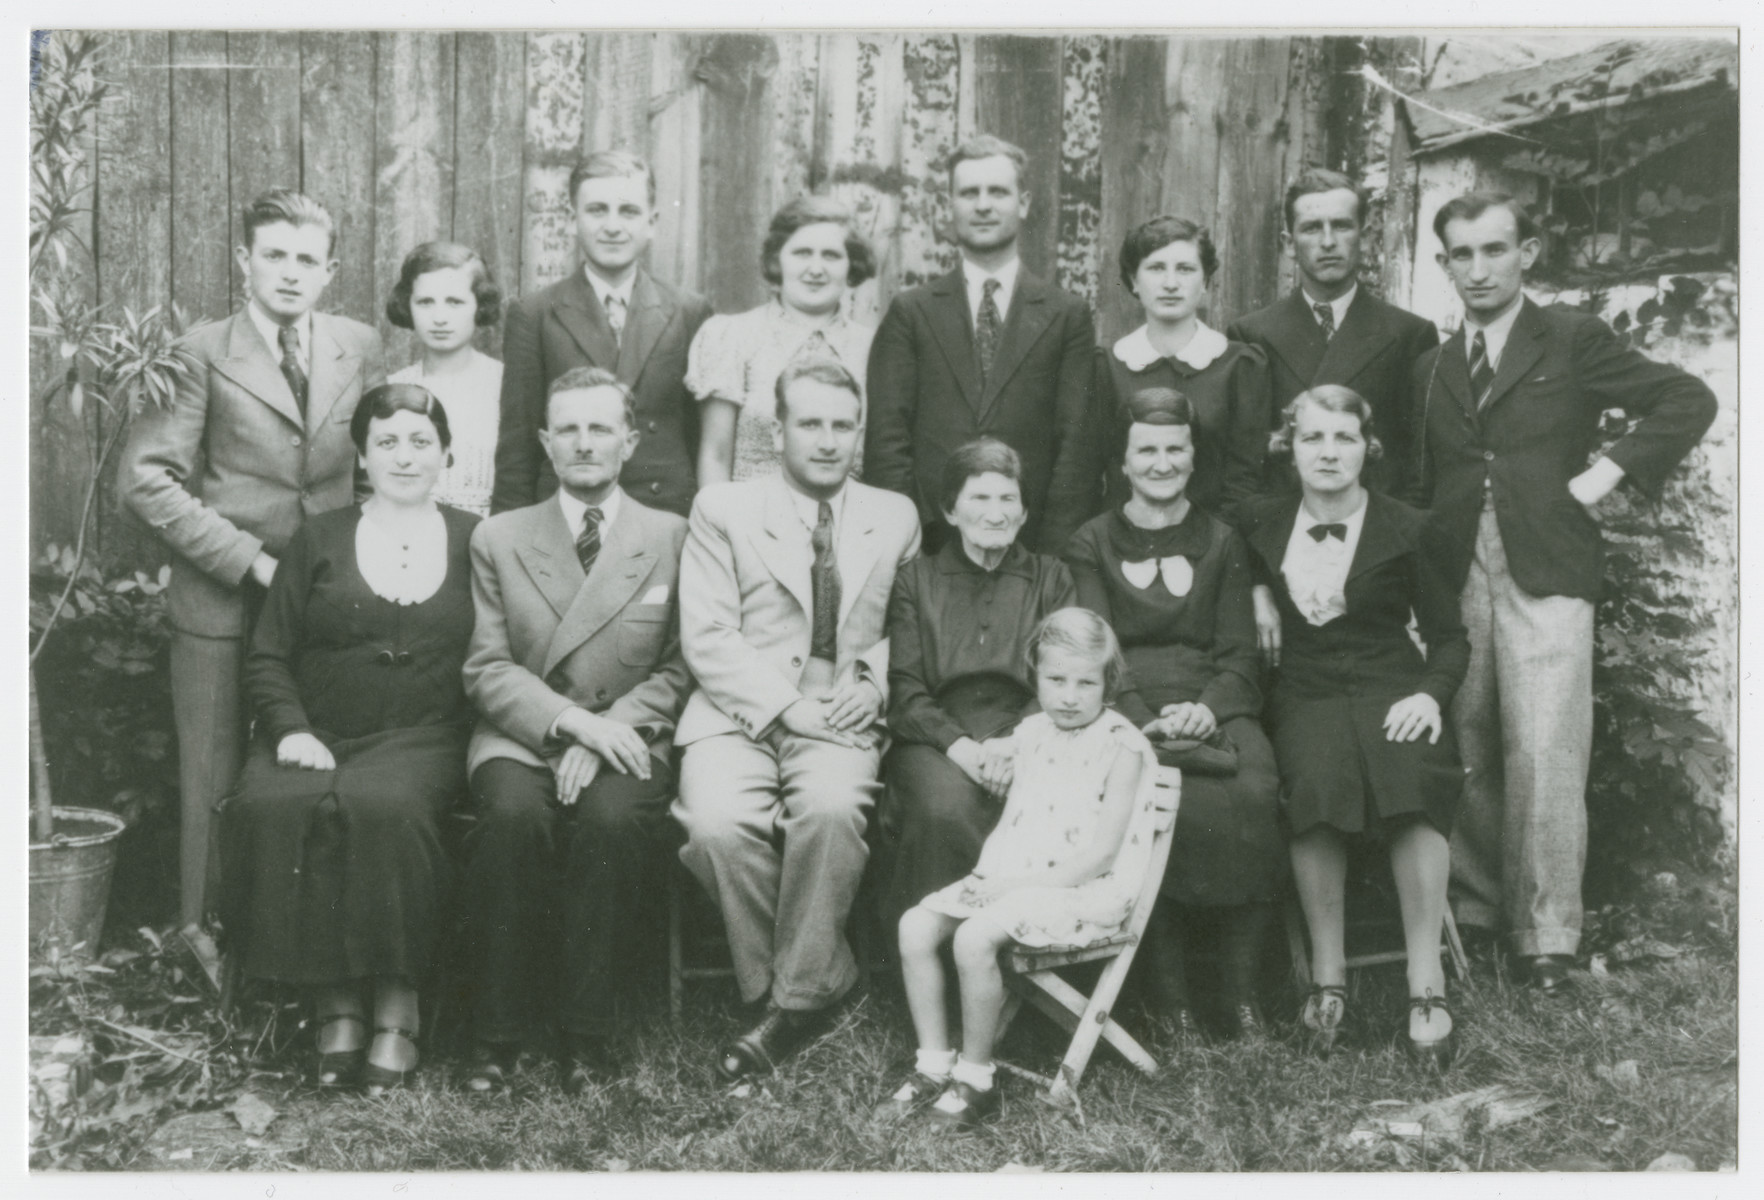 Prewar portrait of the extended Ring family in Krzepice, Poland.

Pictured left to right are front row: Sura Fajga Ring, Zeleg Ring, Russell Ring, Sura Ring, Brindel Ring and Deborah Ring.  The young girl in front is Mania Ring.

Back row: Henoch Ring, Henia Ring, Chemya Rosen, Srul Rosen, Liah Rosen, Etcho Rosen and Mendel Ring.